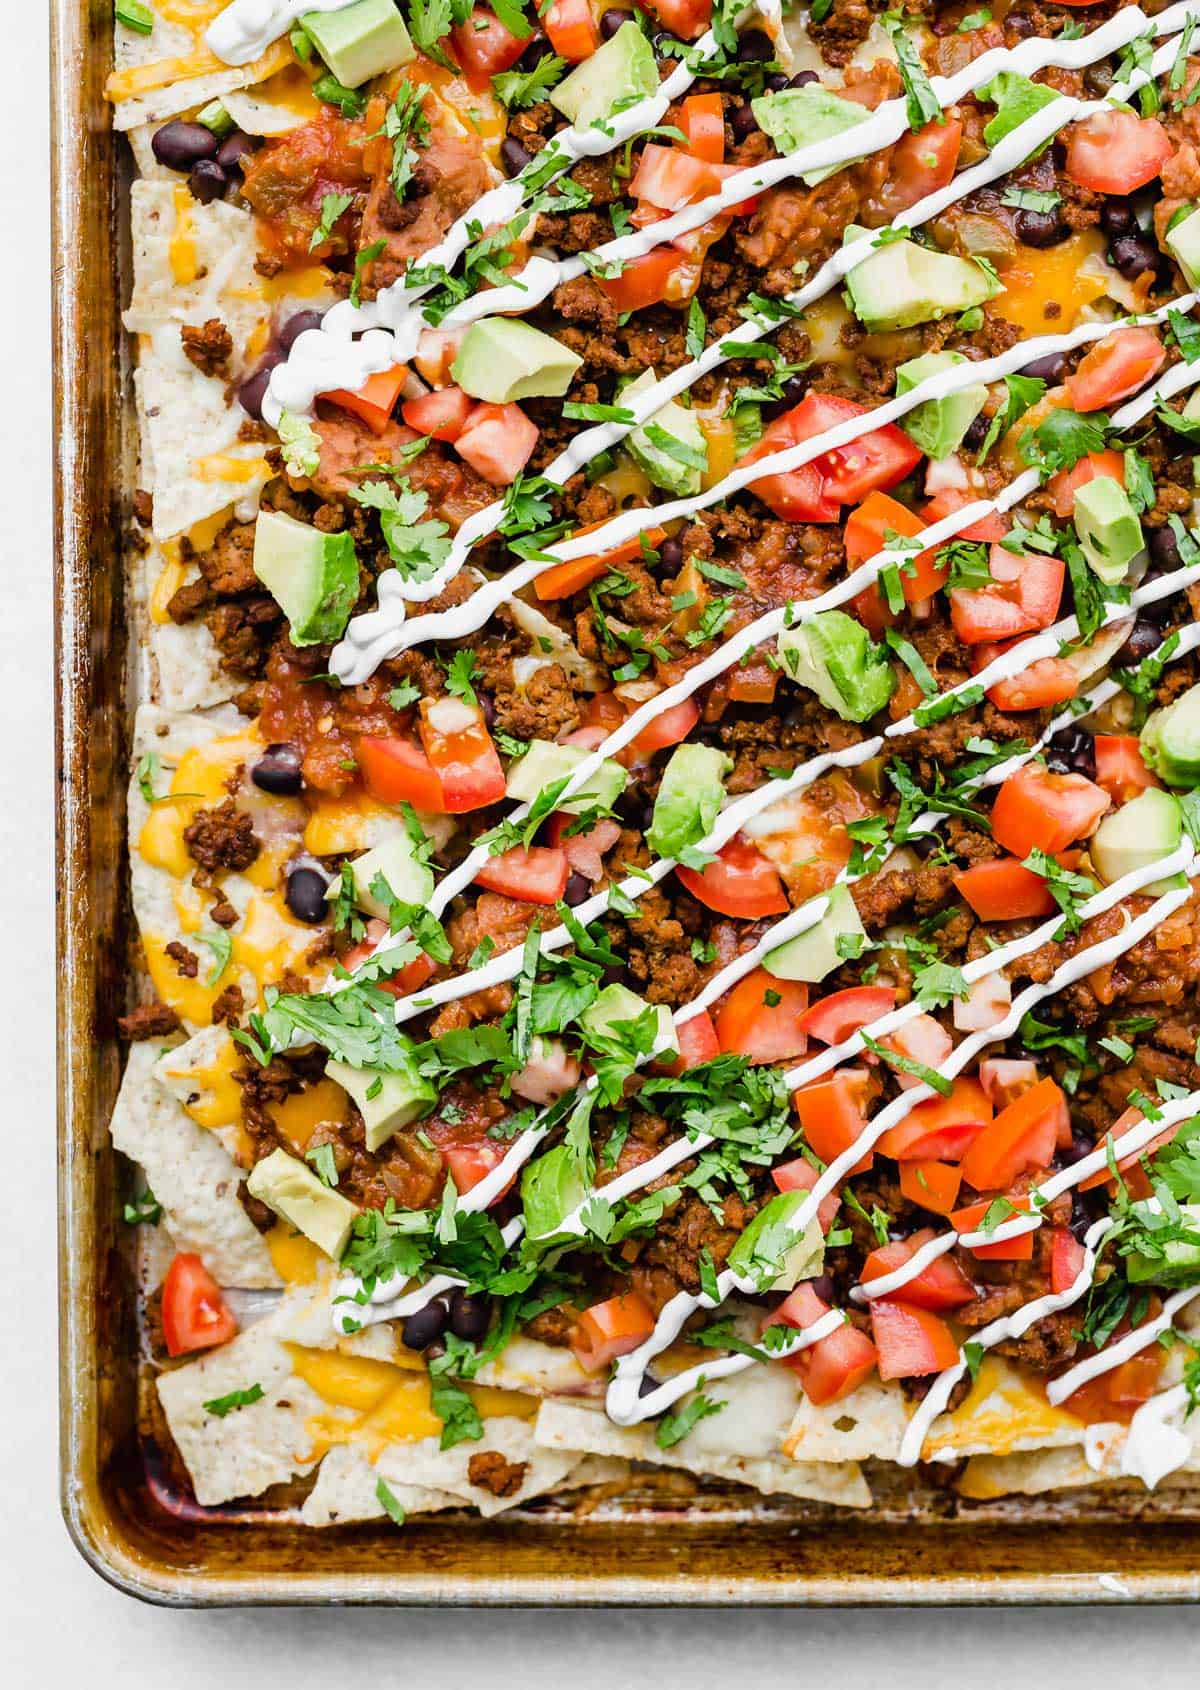 Loaded Nachos topped with tomatoes, avocado, salsa, taco meat, and sour cream.